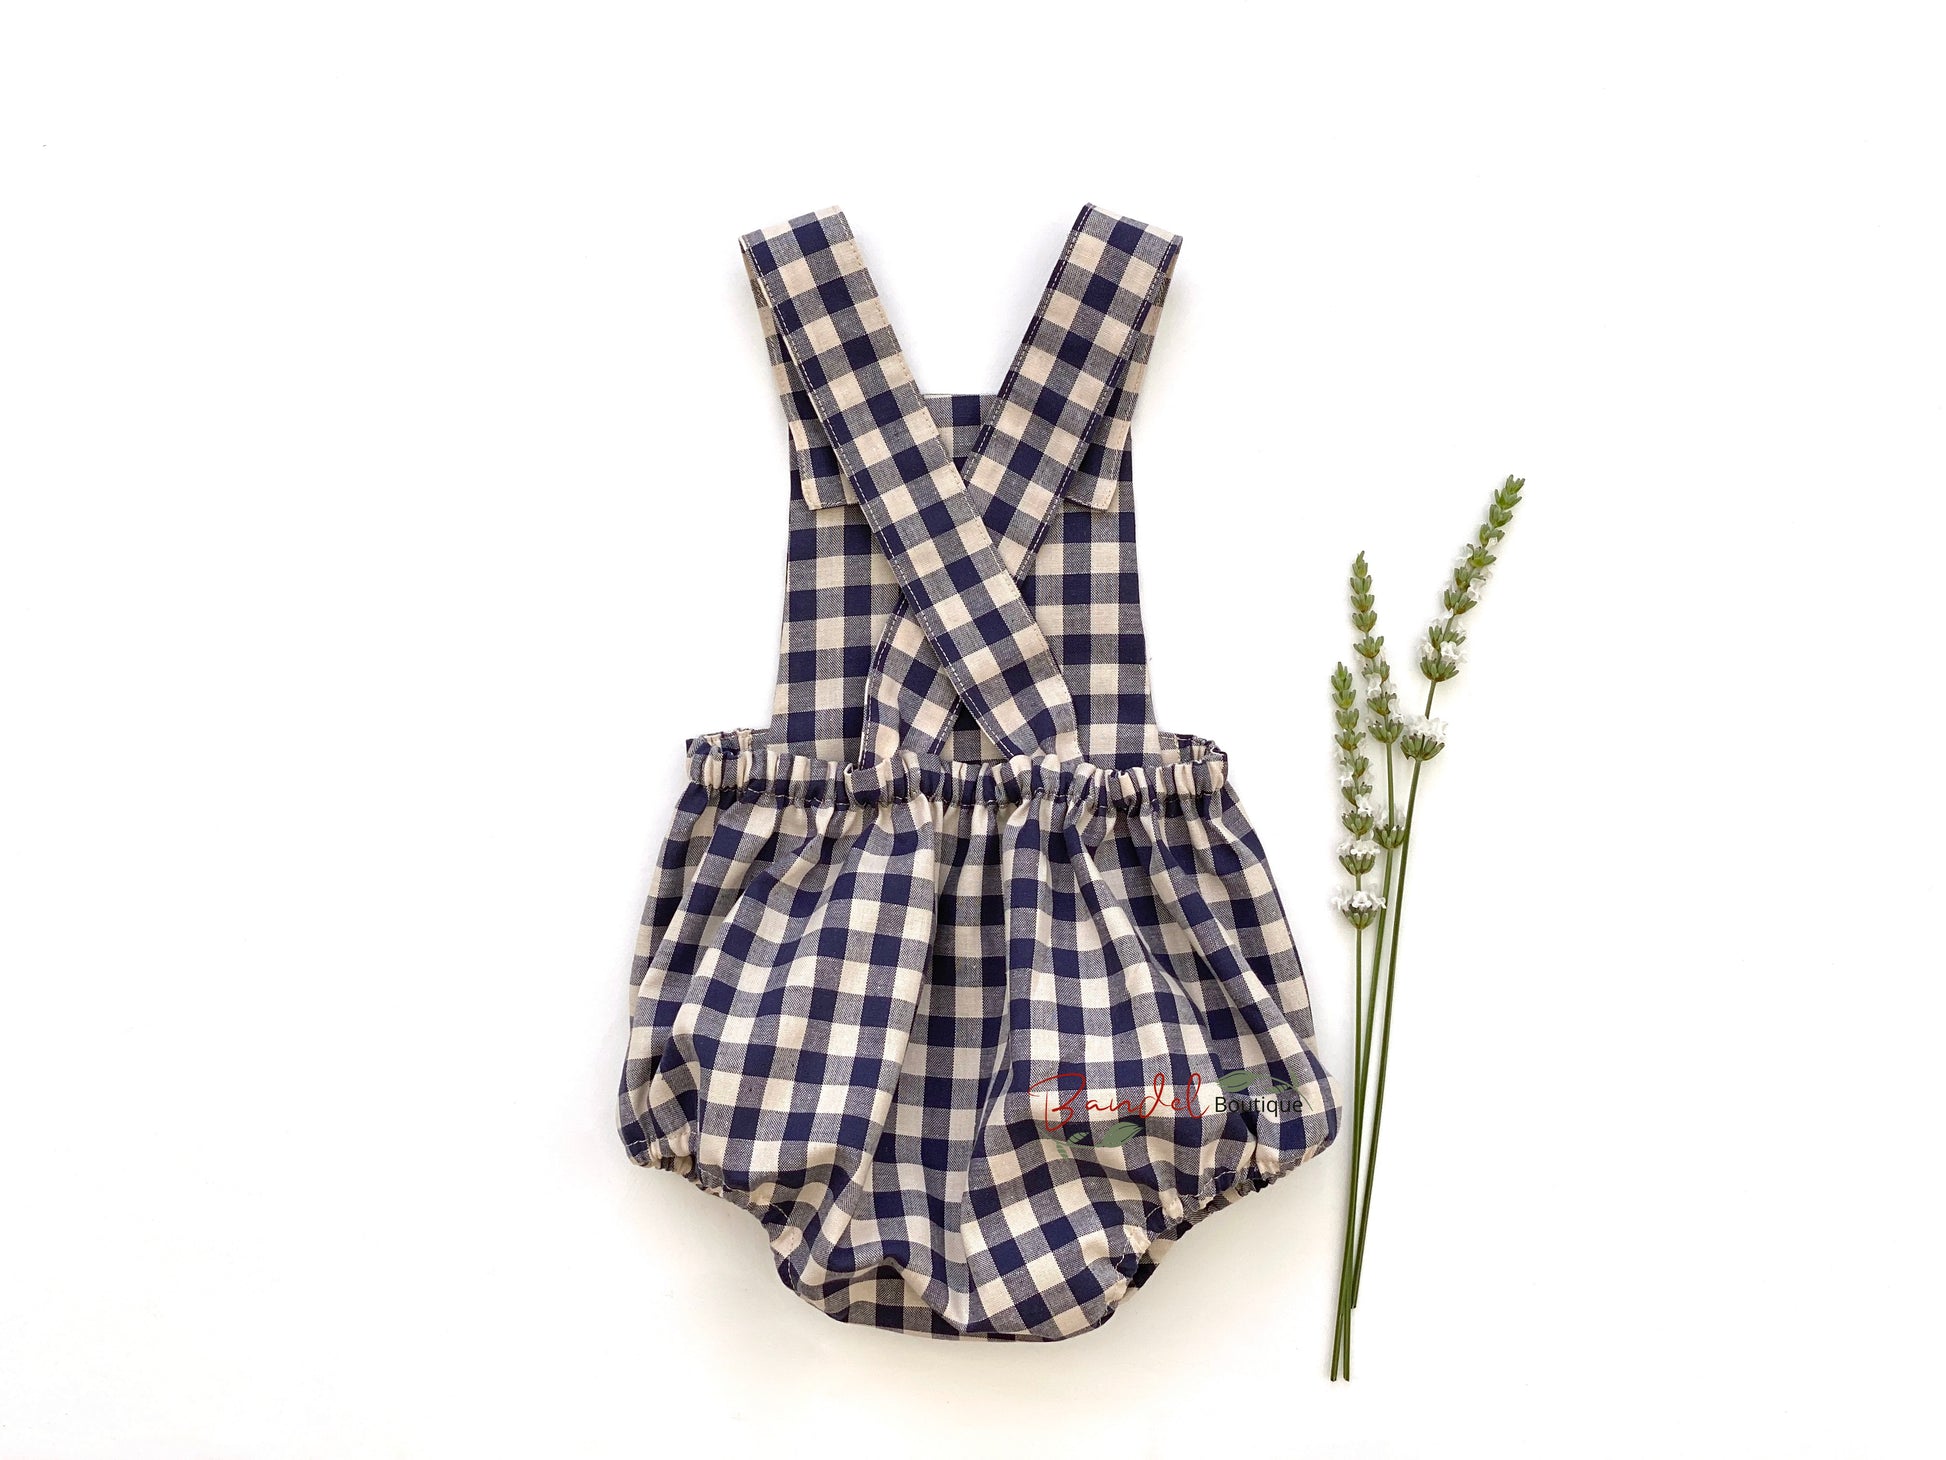 Adorable blue gingham baby romper featuring adjustable straps and rustic wooden buttons.